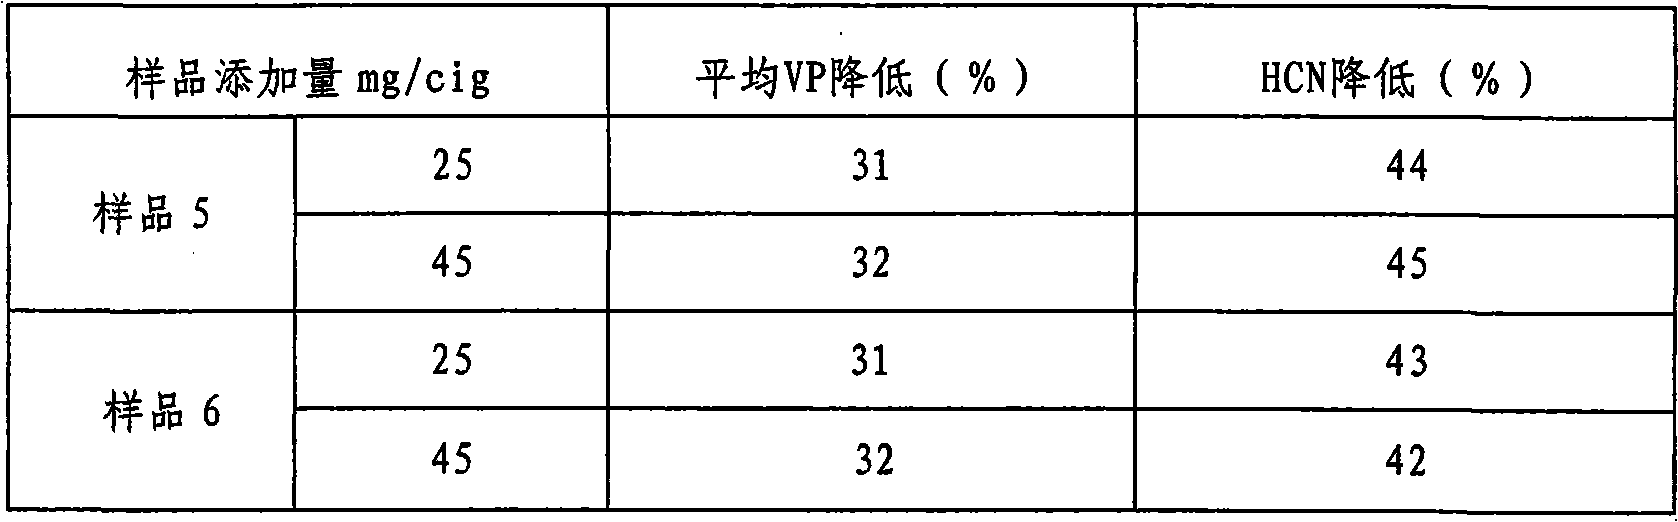 Filter additive for reducing content of hydrocyanic acid in smoke of cigarette and preparation method thereof